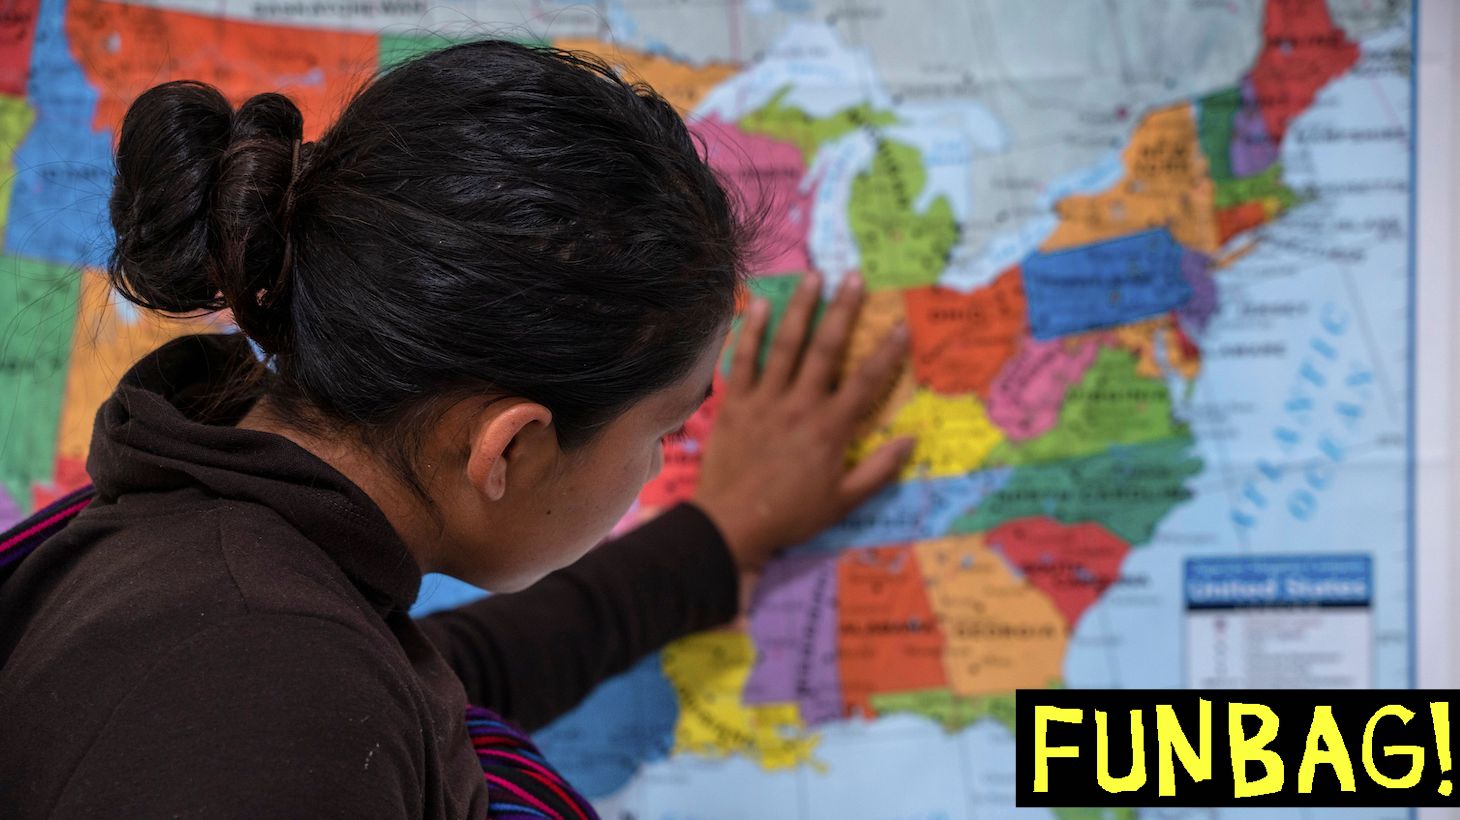 A Guatemalan woman touches a map of the United States at the Casa del Refugiado, or The House of Refugee, a new centre opened by the Annunciation House to help the large flow of migrants being released by the United States Border Patrol and Immigration and Customs Enforcement in El Paso, Texas on April 24, 2019. - The 125,000 foot space will accomodate about 500 migrants, with plans to expand for up to 1,500. While this is larger then other centres in the El Paso area, Father Ruben Garcia the director of Annunciation house says that they will still rely on churches around the community for help housing migrants. According to the CBP, border patrol agents apprehended 92,607 people along the southwest border in March, up from 66,884 in February. US President Donald Trump, who has made immigration the core of his message to his conservative base, said on Twitter that "a very big Caravan of over 20,000 people" is making its way through Mexico toward the United States. (Photo by Paul Ratje / AFP) (Photo credit should read PAUL RATJE/AFP via Getty Images)